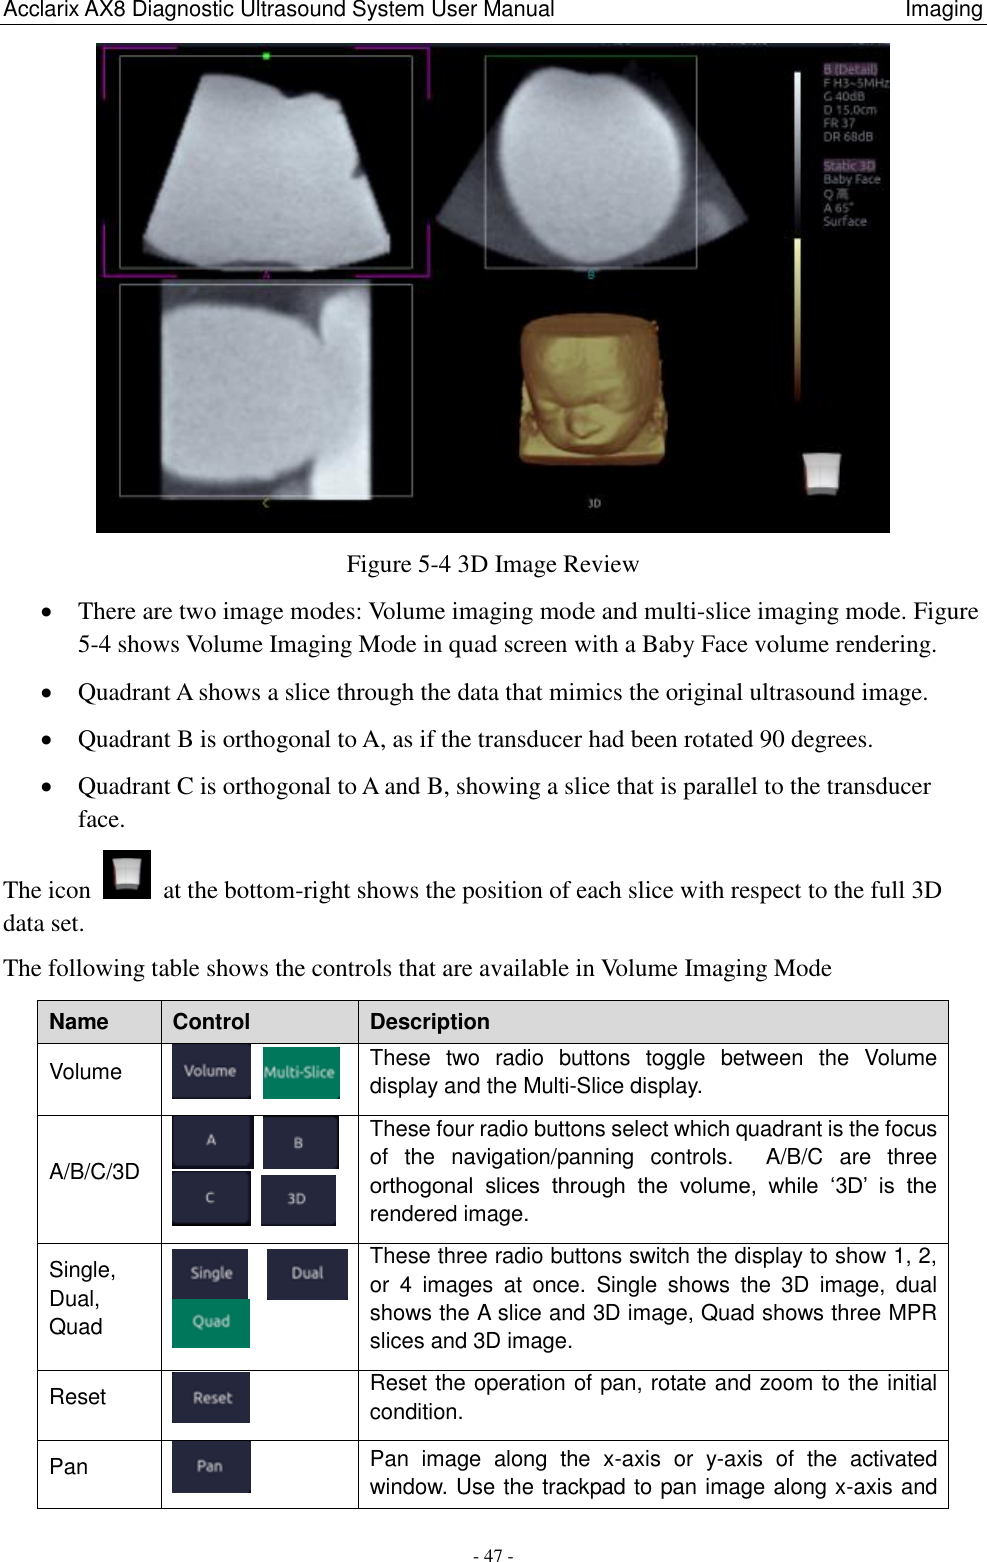 Acclarix AX8 Diagnostic Ultrasound System User Manual                                                                Imaging - 47 -  Figure 5-4 3D Image Review  There are two image modes: Volume imaging mode and multi-slice imaging mode. Figure 5-4 shows Volume Imaging Mode in quad screen with a Baby Face volume rendering.    Quadrant A shows a slice through the data that mimics the original ultrasound image.  Quadrant B is orthogonal to A, as if the transducer had been rotated 90 degrees.  Quadrant C is orthogonal to A and B, showing a slice that is parallel to the transducer face. The icon    at the bottom-right shows the position of each slice with respect to the full 3D data set. The following table shows the controls that are available in Volume Imaging Mode     Name Control Description Volume   These  two  radio  buttons  toggle  between  the  Volume display and the Multi-Slice display. A/B/C/3D      These four radio buttons select which quadrant is the focus of  the  navigation/panning  controls.    A/B/C  are  three orthogonal  slices  through  the  volume,  while  „3D‟  is  the rendered image. Single, Dual, Quad  These three radio buttons switch the display to show 1, 2, or  4  images  at  once.  Single  shows  the  3D  image,  dual shows the A slice and 3D image, Quad shows three MPR slices and 3D image. Reset  Reset the operation of pan, rotate and zoom to the initial condition. Pan  Pan  image  along  the  x-axis  or  y-axis  of  the  activated window. Use the trackpad to pan image along x-axis and 